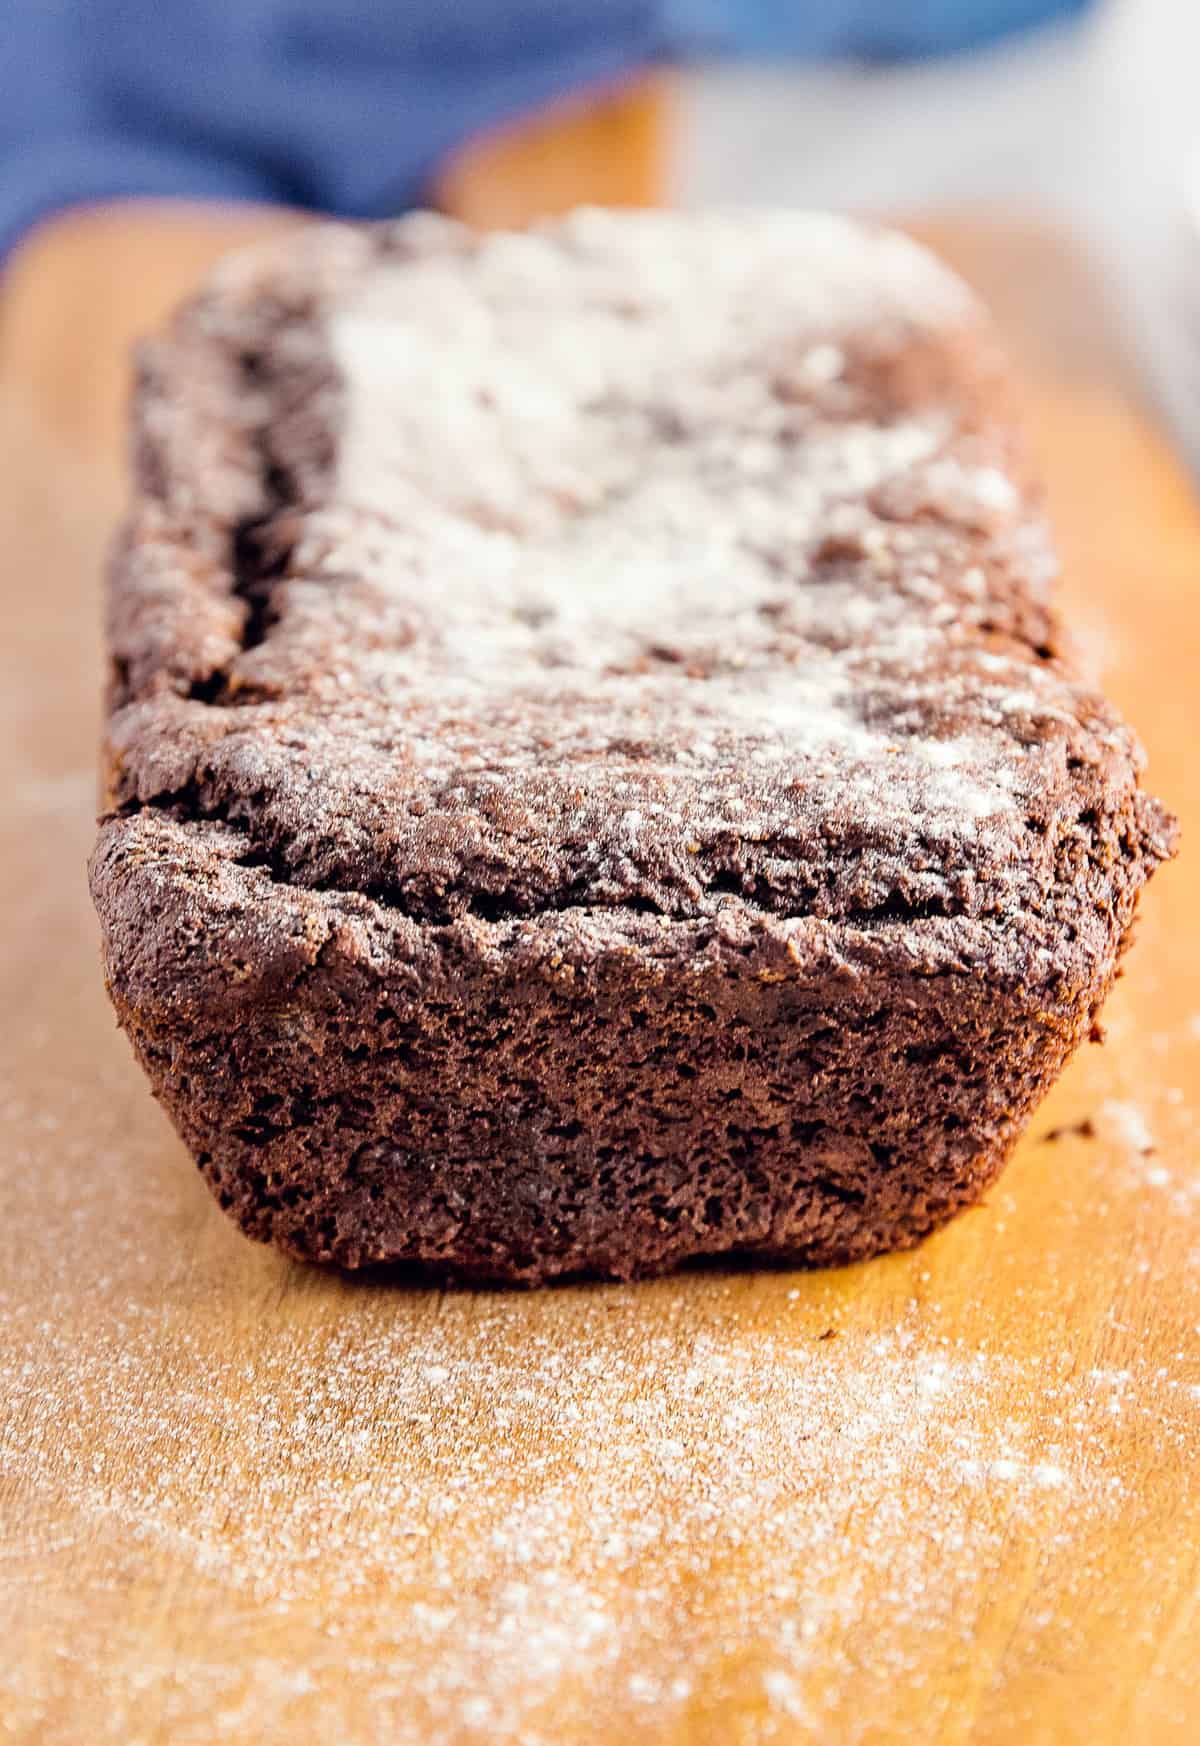 Fudgy Chocolate Banana Bread, vegan, vegetarian, whole food plant based, gluten free, recipe, wfpb, healthy, oil free, no refined sugar, no oil, refined sugar free, dinner, side, side dish, dairy free, dinner party, entertaining